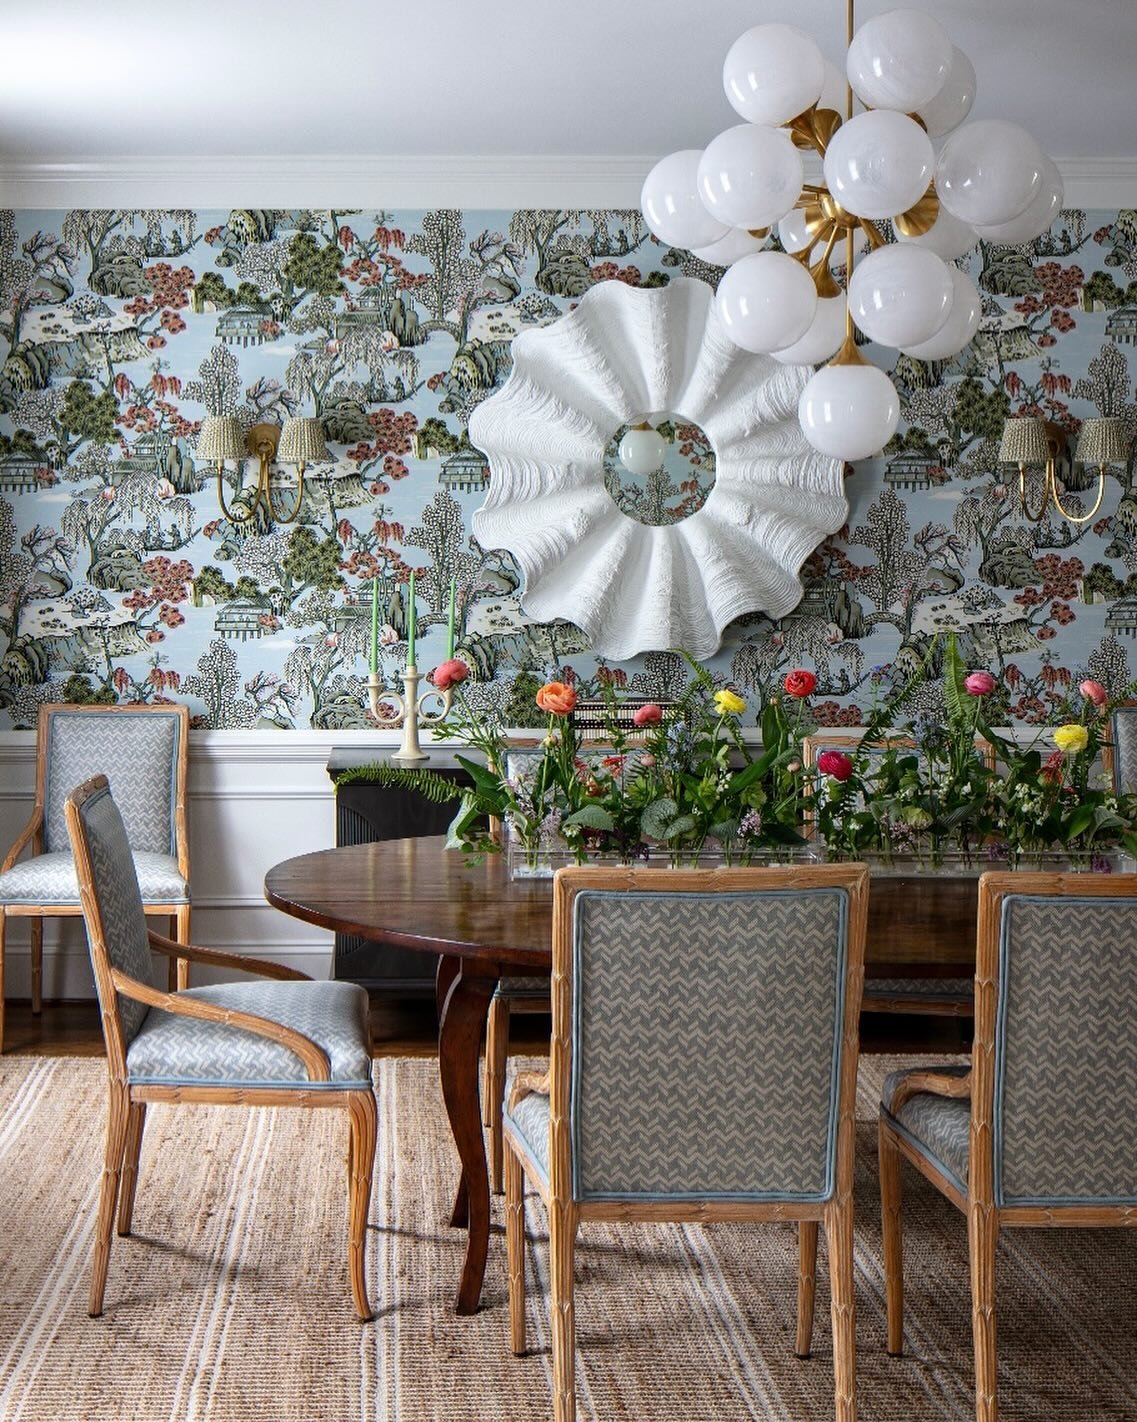 A happy dining room made beautiful with Garden Week flowers. The paper was already in the home and we infused elements that made the room feel like home for our client ❤️
.
.
.
📷 @gordongregoryphoto